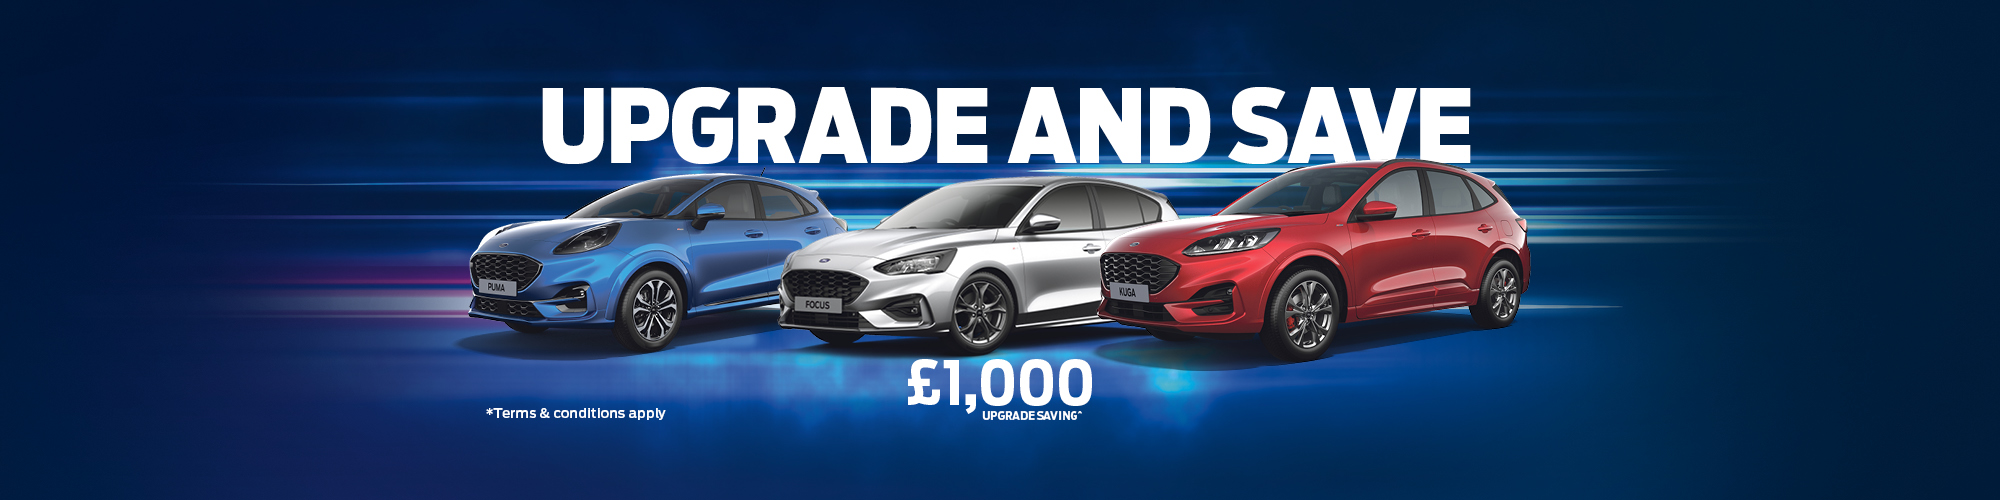 New Car Offers Hot Offers TrustFord